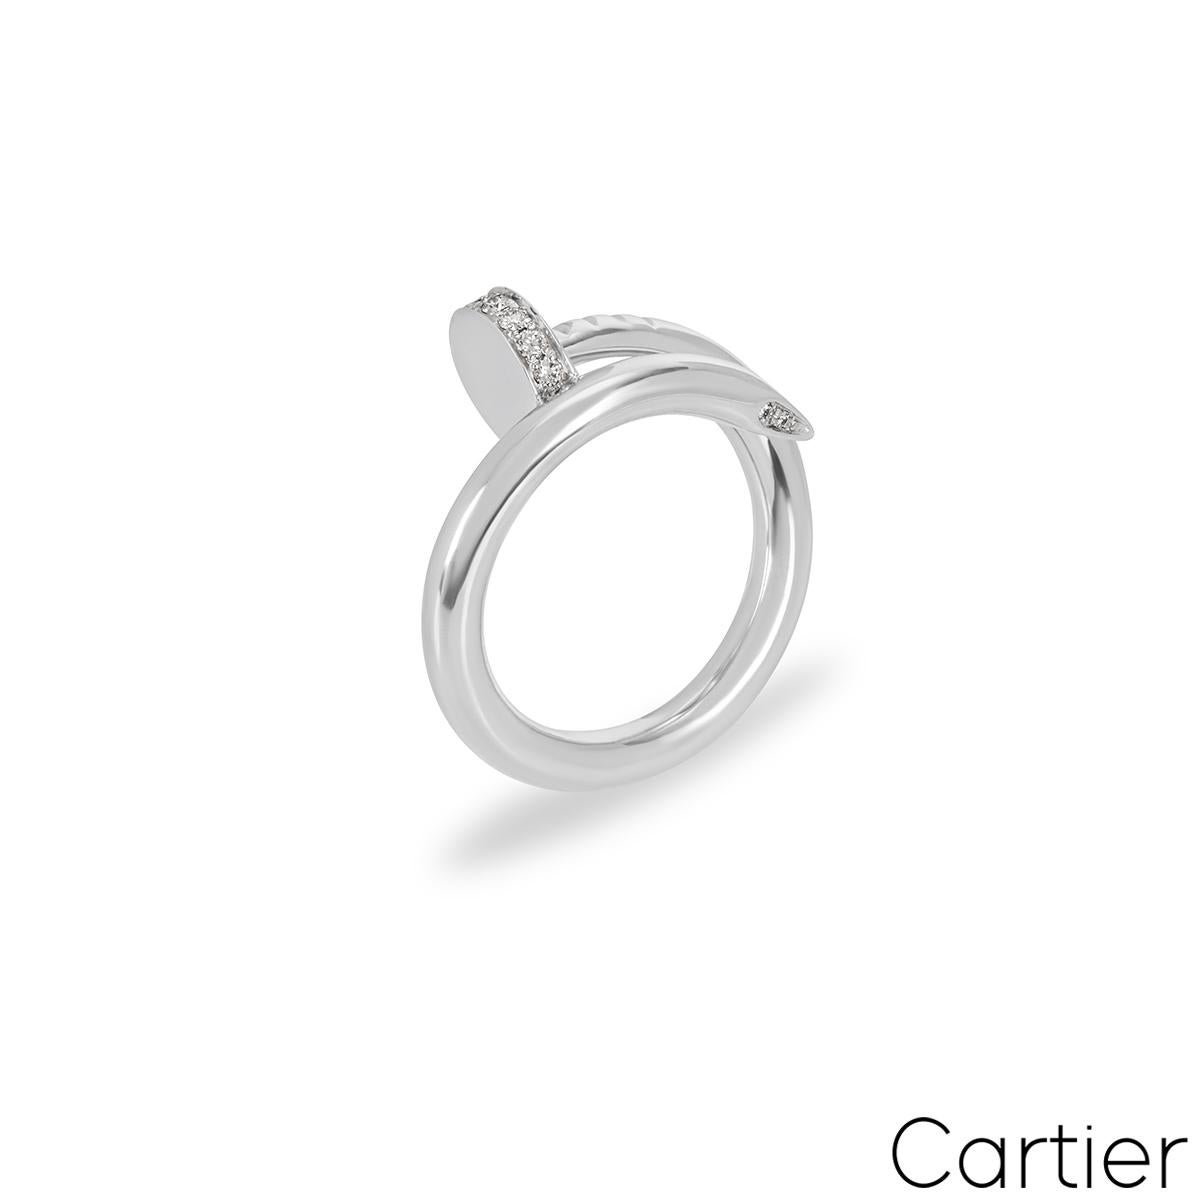 A stylish 18k white gold diamond ring by Cartier from the Juste Un Clou collection. The ring is in the style of a nail and has 22 round brilliant cut pave diamonds set in the head and tip with an approximate total weight of 0.13ct. The ring is UK